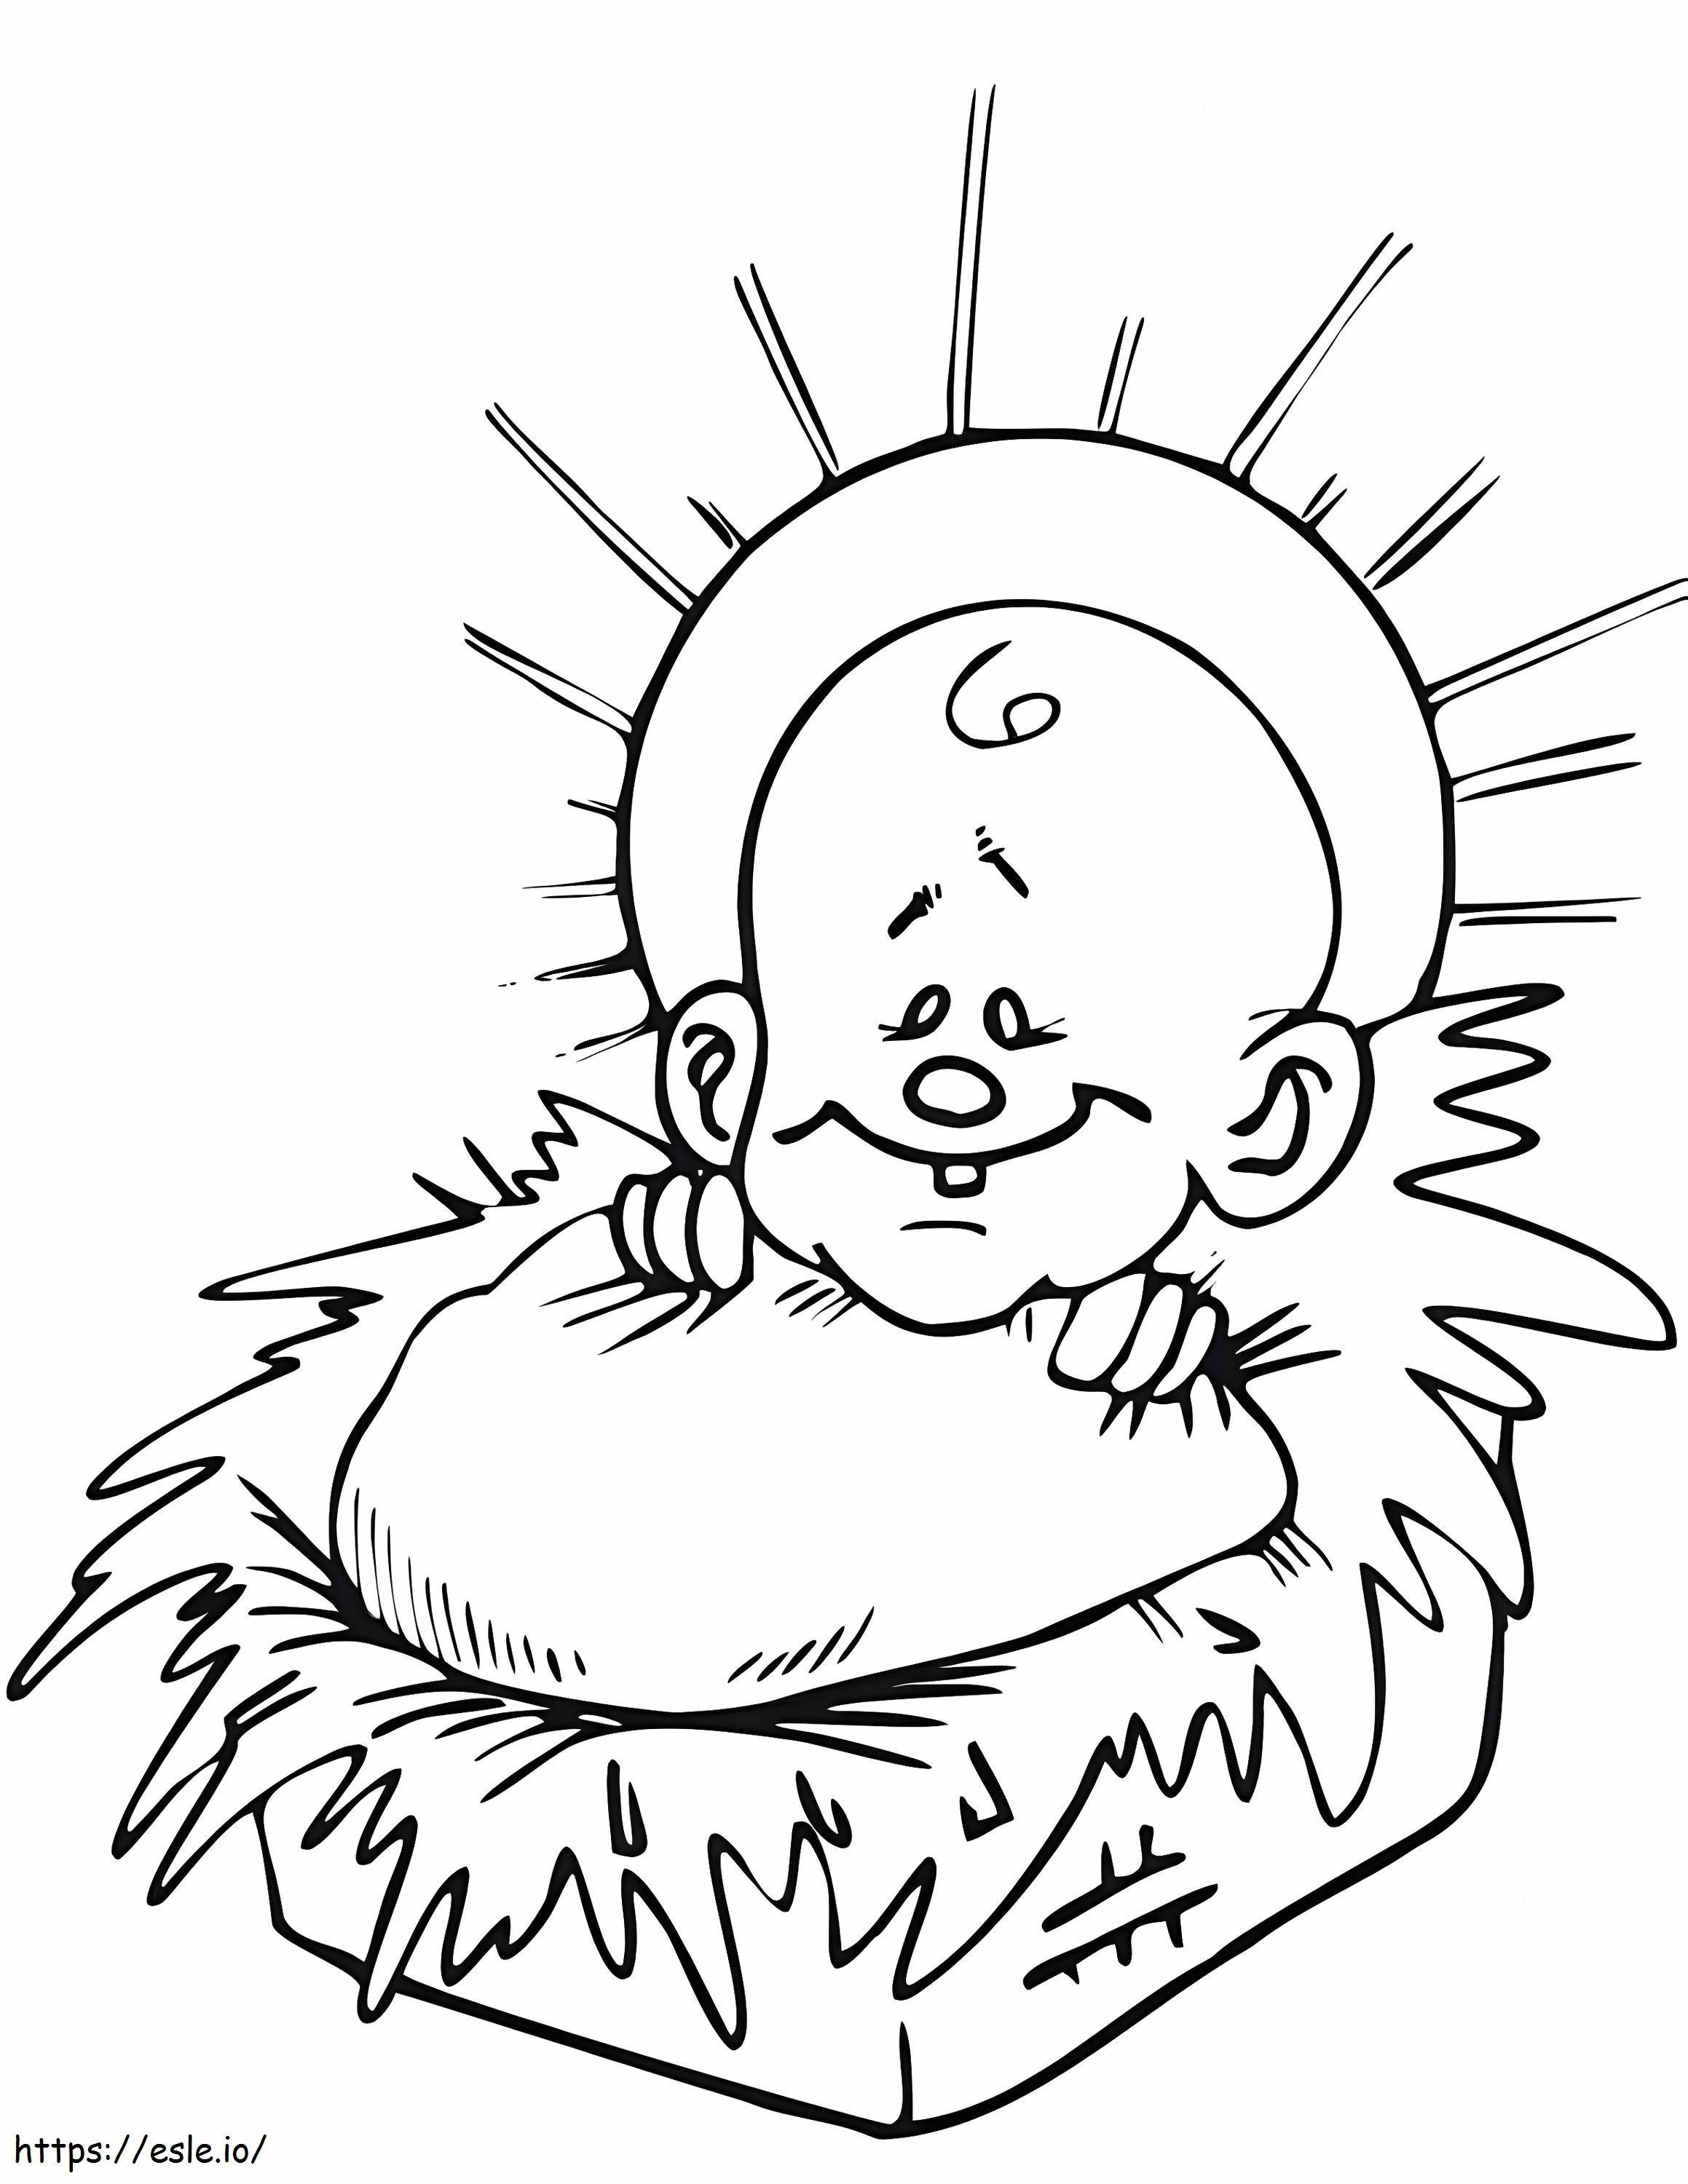 Jesus In A Manger coloring page